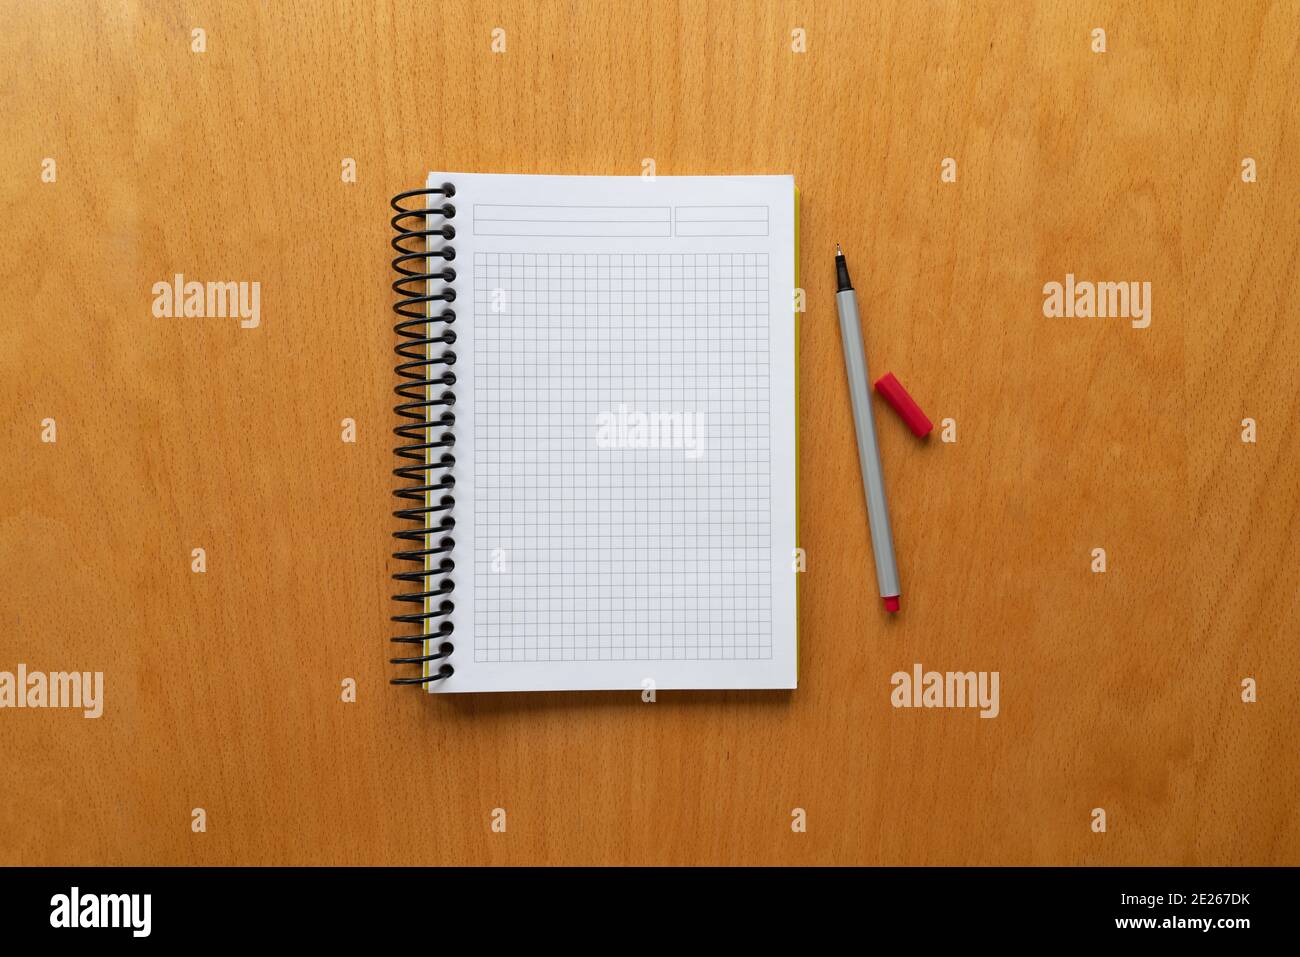 white notebook and red pencil on wooden table background, graph, grid black squared, isolated. blank paper. taking note. new year's resolution, goals. Stock Photo